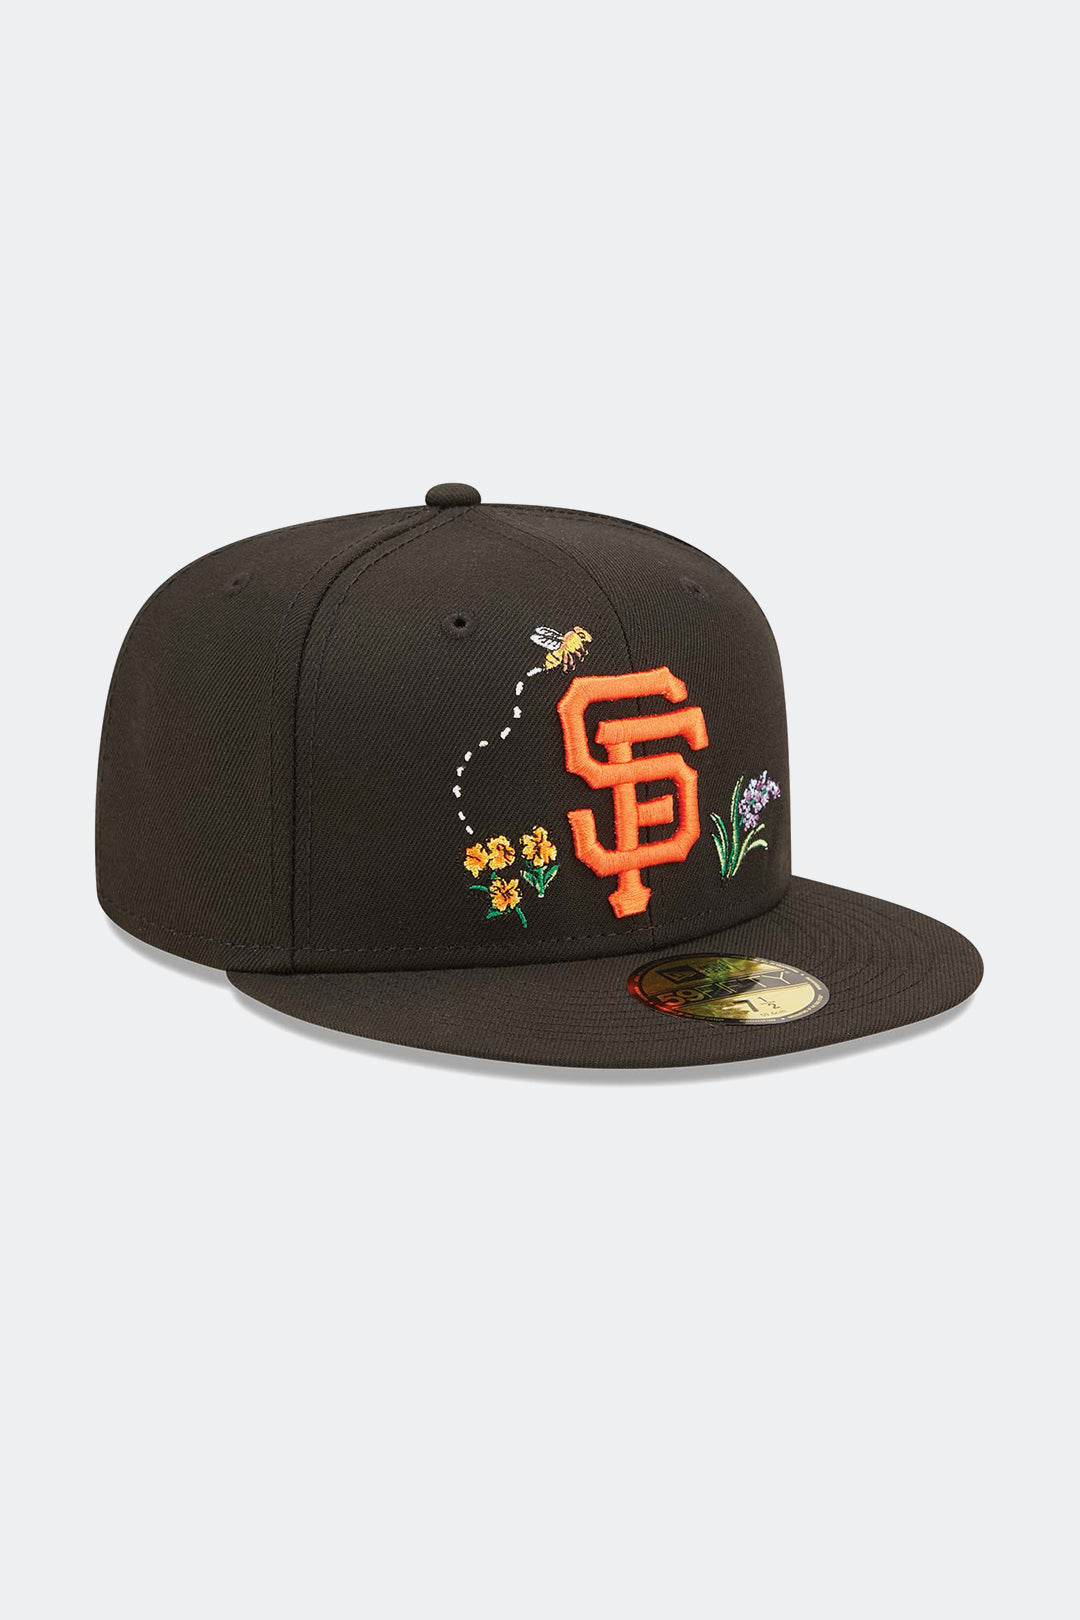 NEW ERA 59FIFTY SAN FRANCISCO GIANTS "WATERCOLOR FLORAL" - HYPE